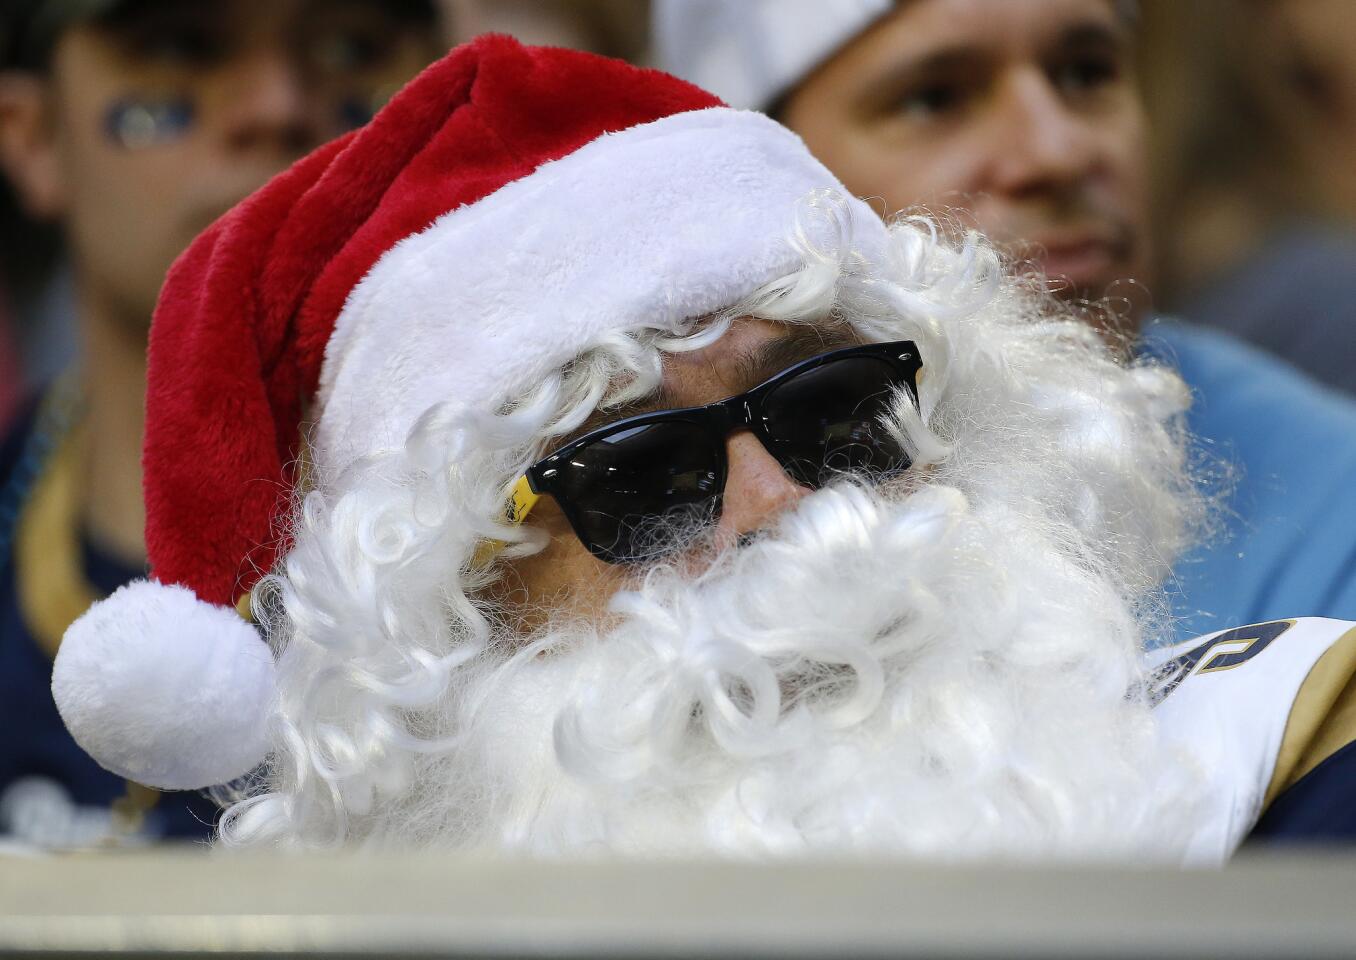 A Los Angeles Rams fan wears a Santa hat and beard during the second half of an NFL football game against the Arizona Cardinals, Sunday, Dec. 23, 2018, in Glendale, Ariz.